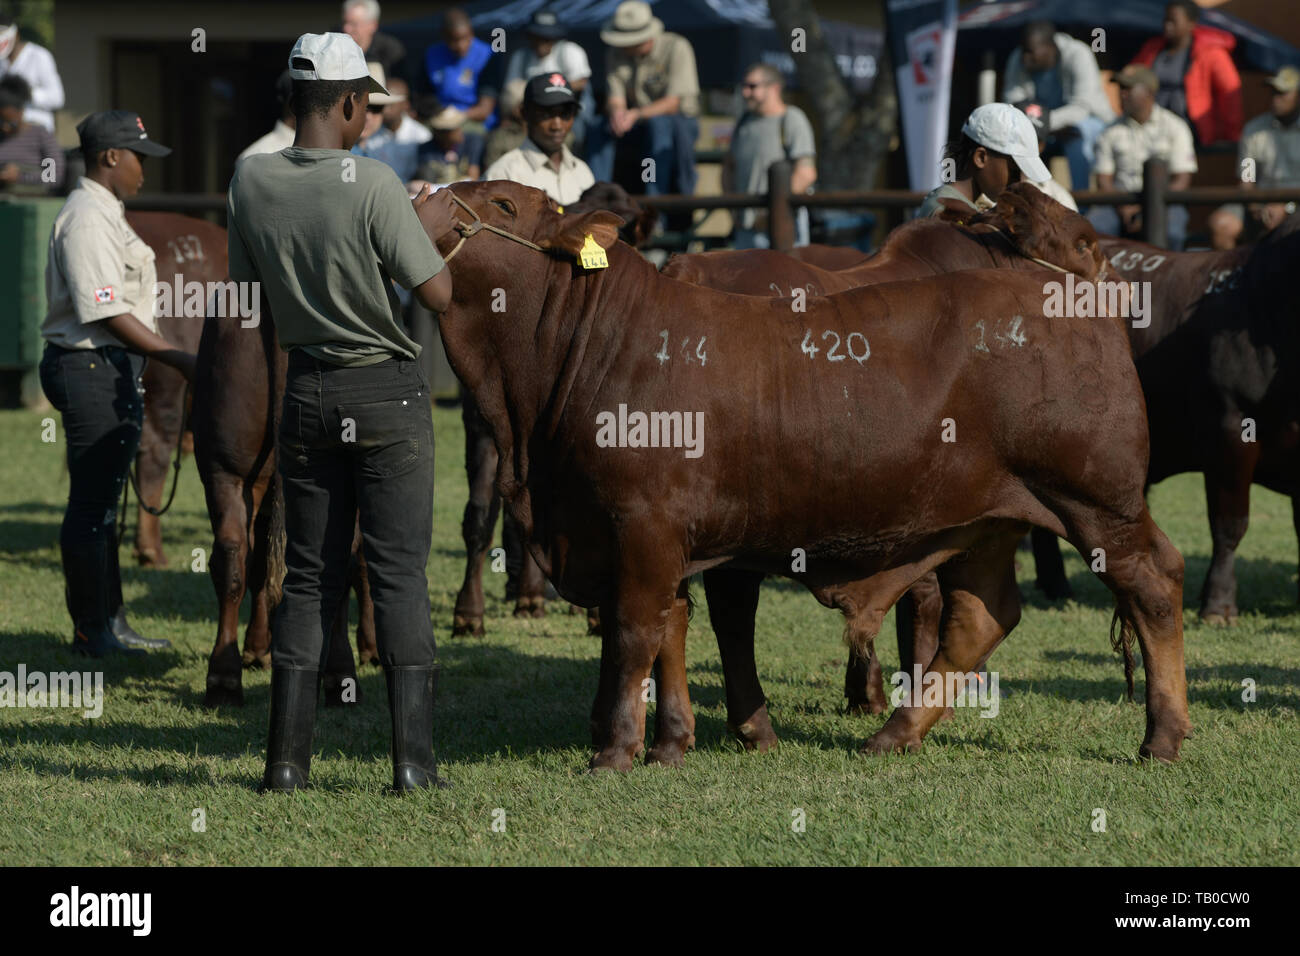 Pietermaritzburg, South Africa, male handler interacting with steer in competition arena, 2019, Royal Agricultural Show, people, animals, agriculture Stock Photo